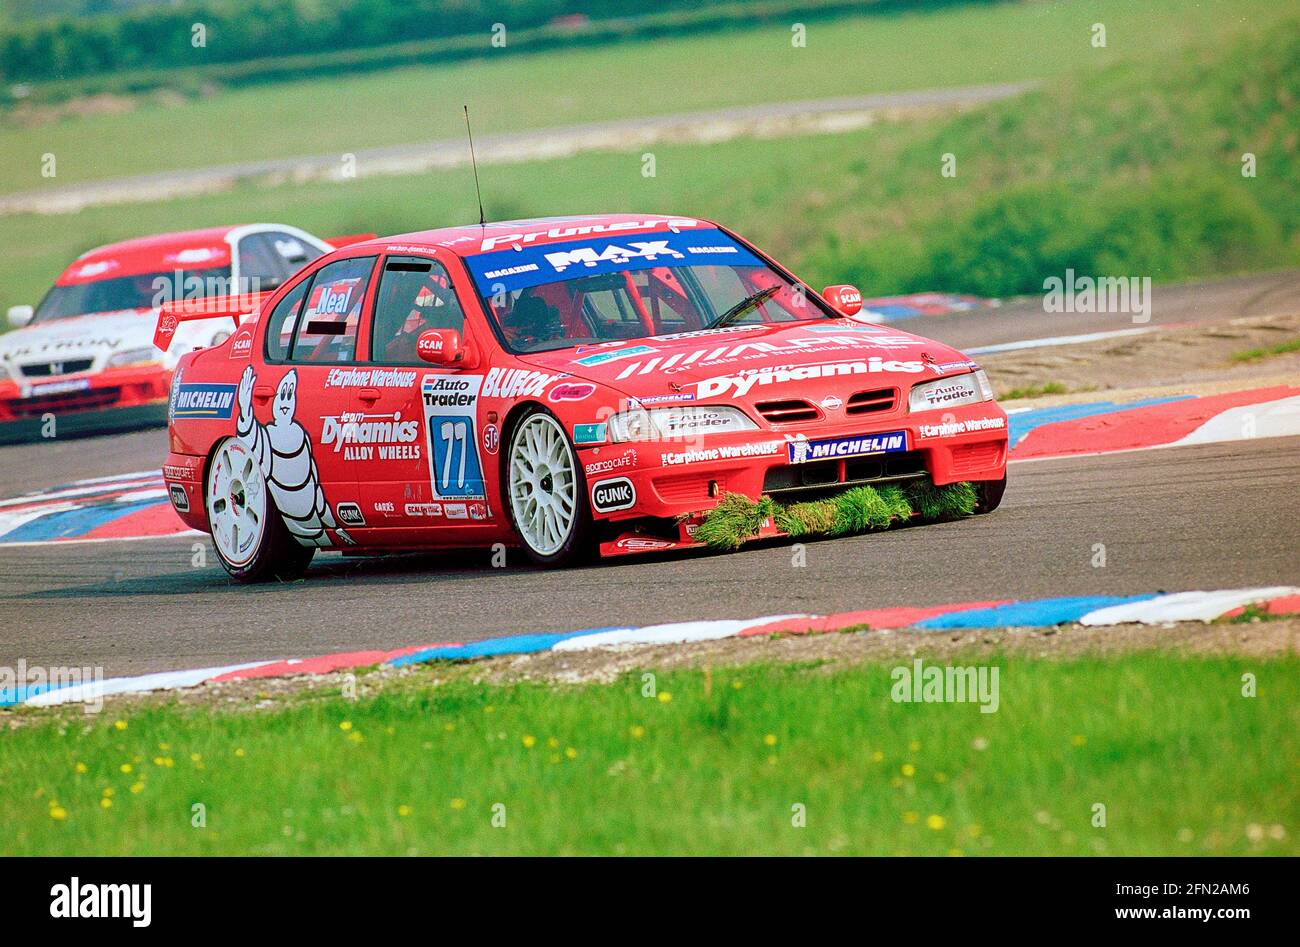 Matt Neal collecting grass in his front spoiler at Thruxton Circuit during the 1999 British Touring Car Championship driving his Max Power Racing Team Dynamics Nissan Primera GT. Stock Photo